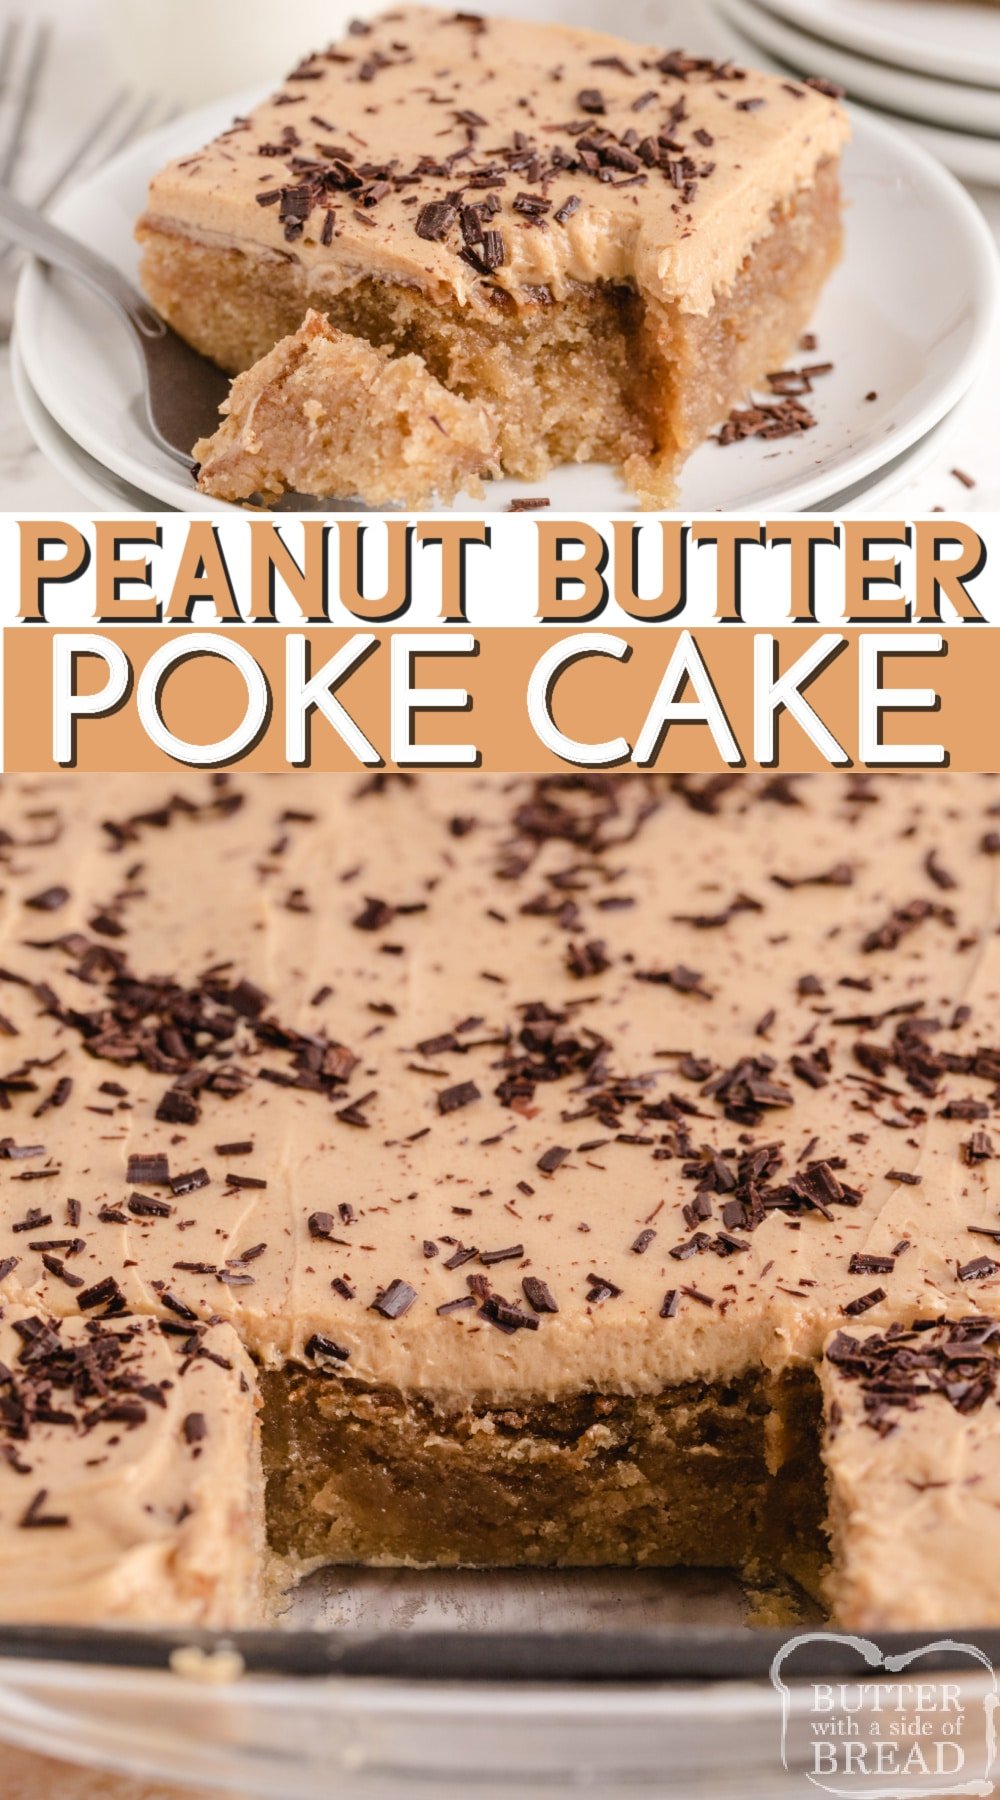 Peanut Butter Poke Cake made from scratch with a delicious peanut butter drizzle and a light peanut butter frosting on top! Tons of peanut butter flavor in this amazing poke cake recipe!